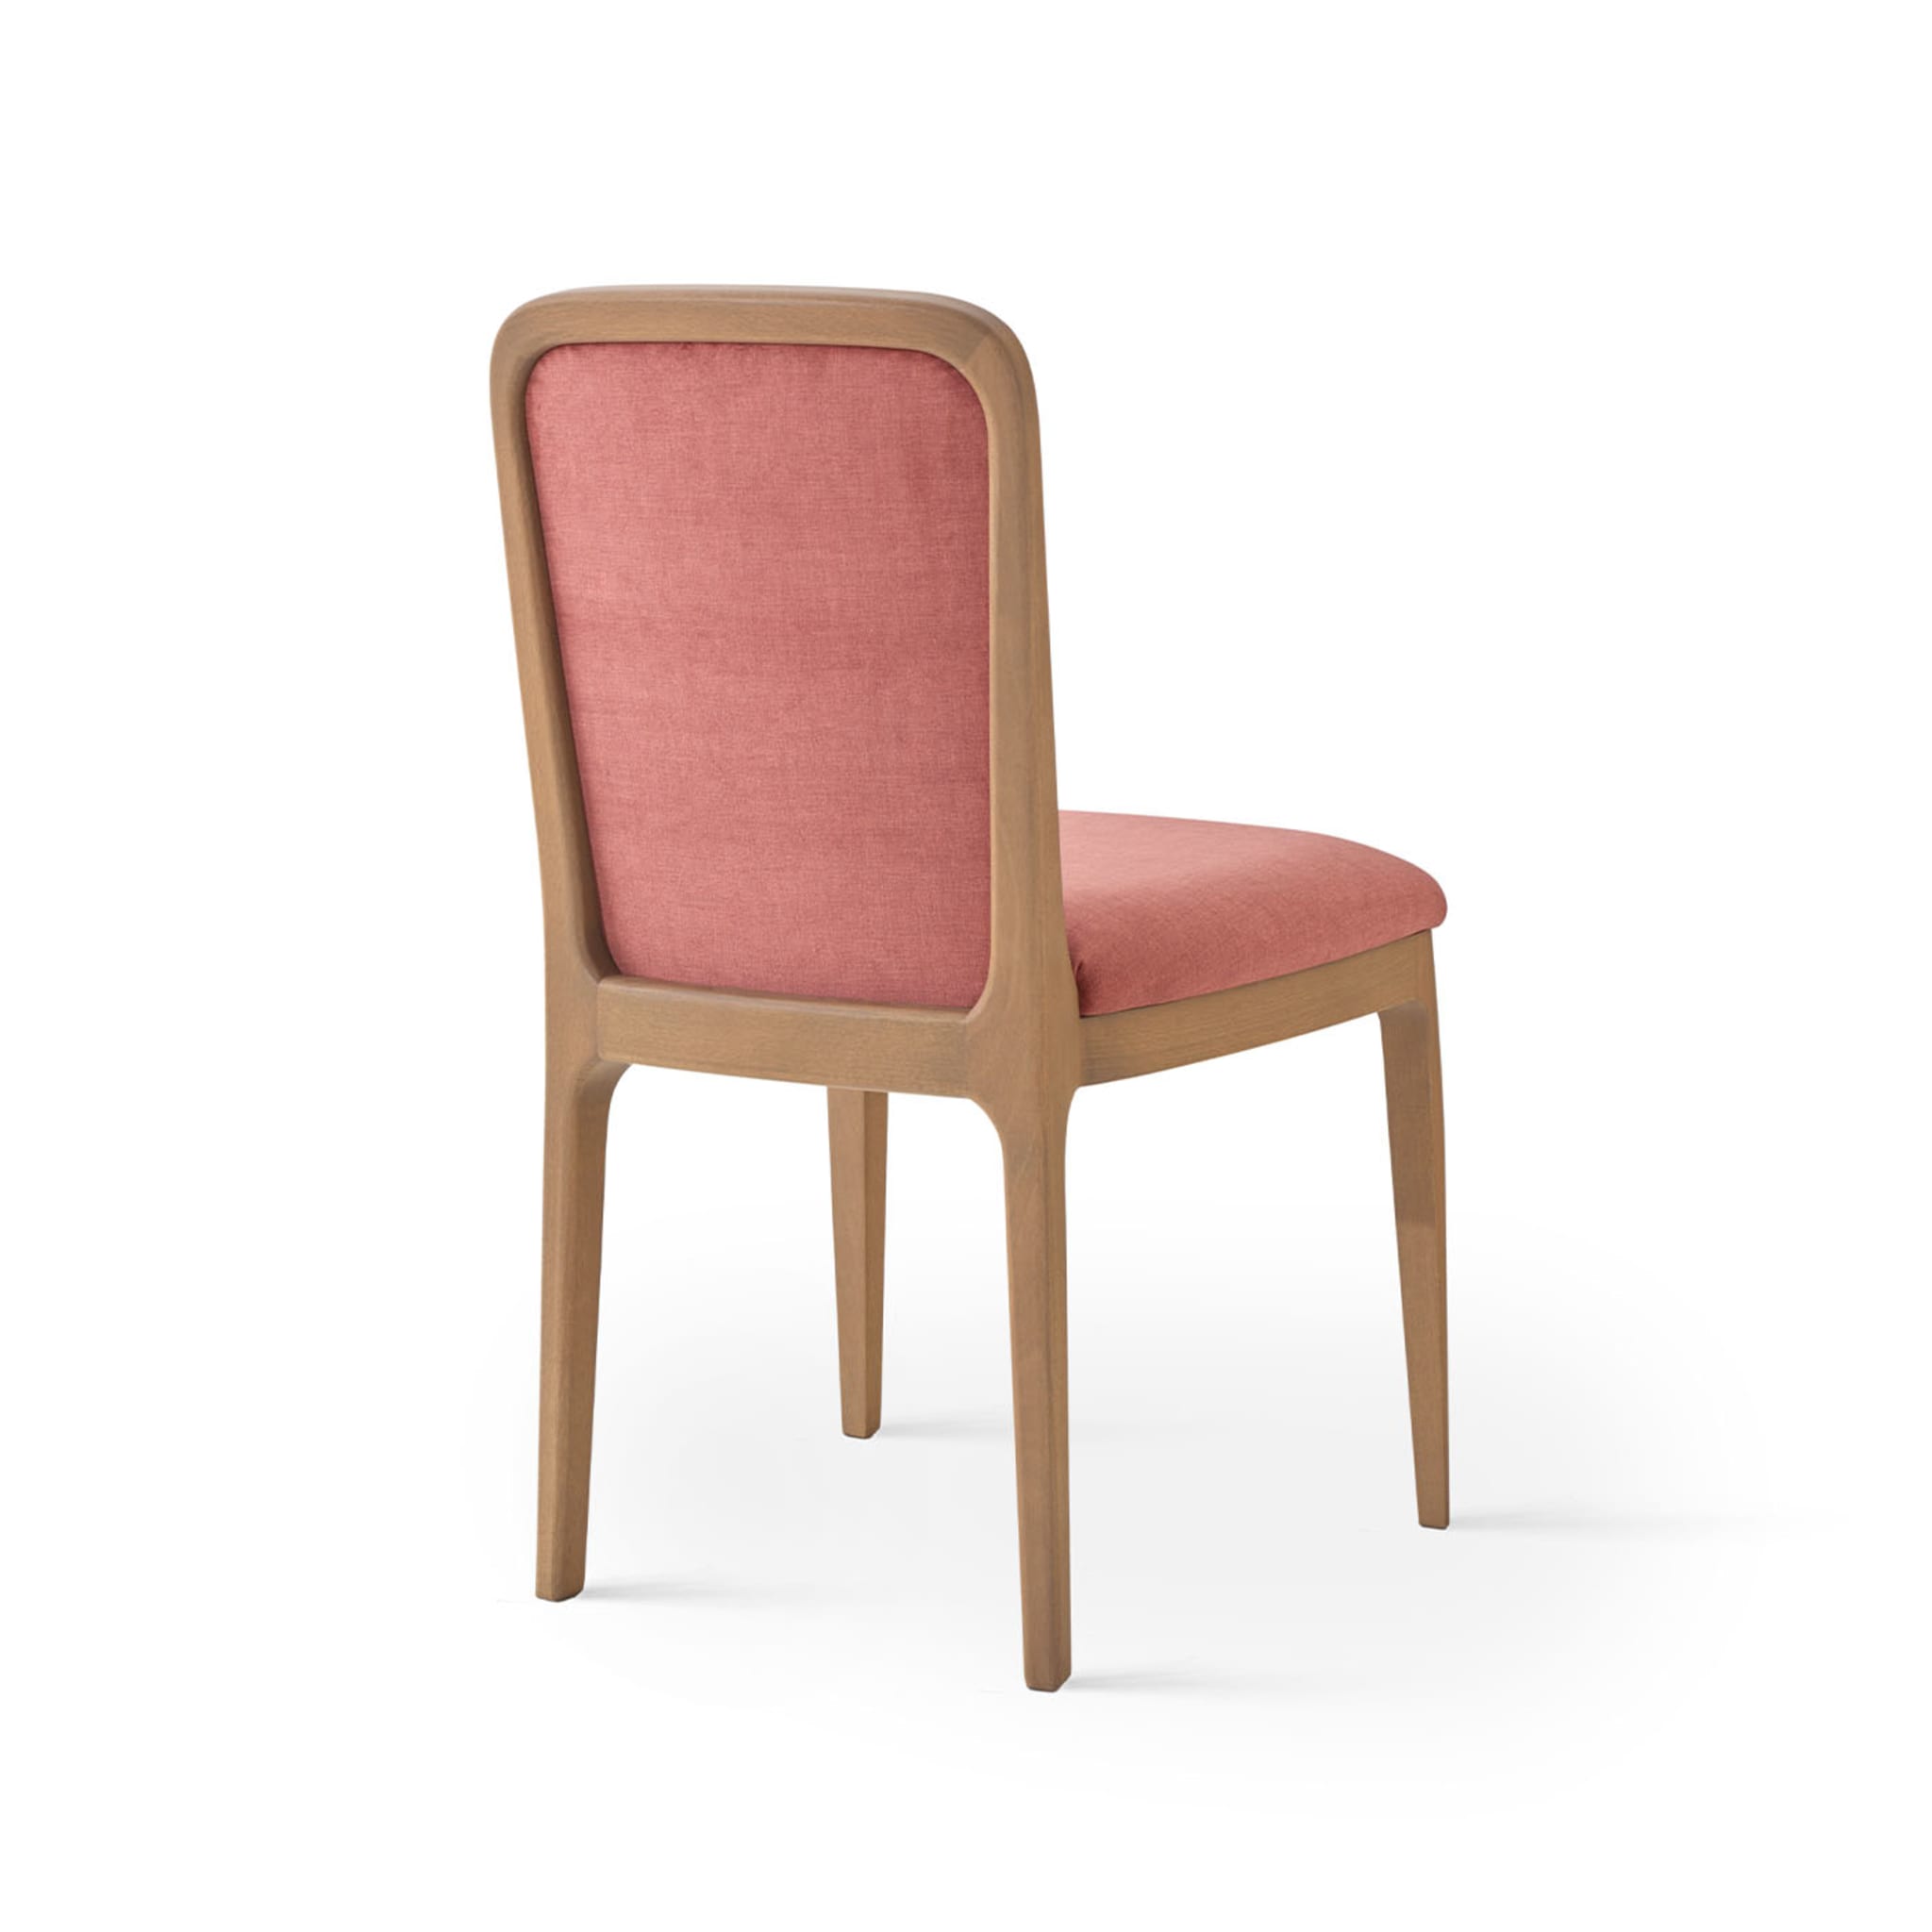 Shangai Salmon-Pink & Elm-Finished Chair - Alternative view 1